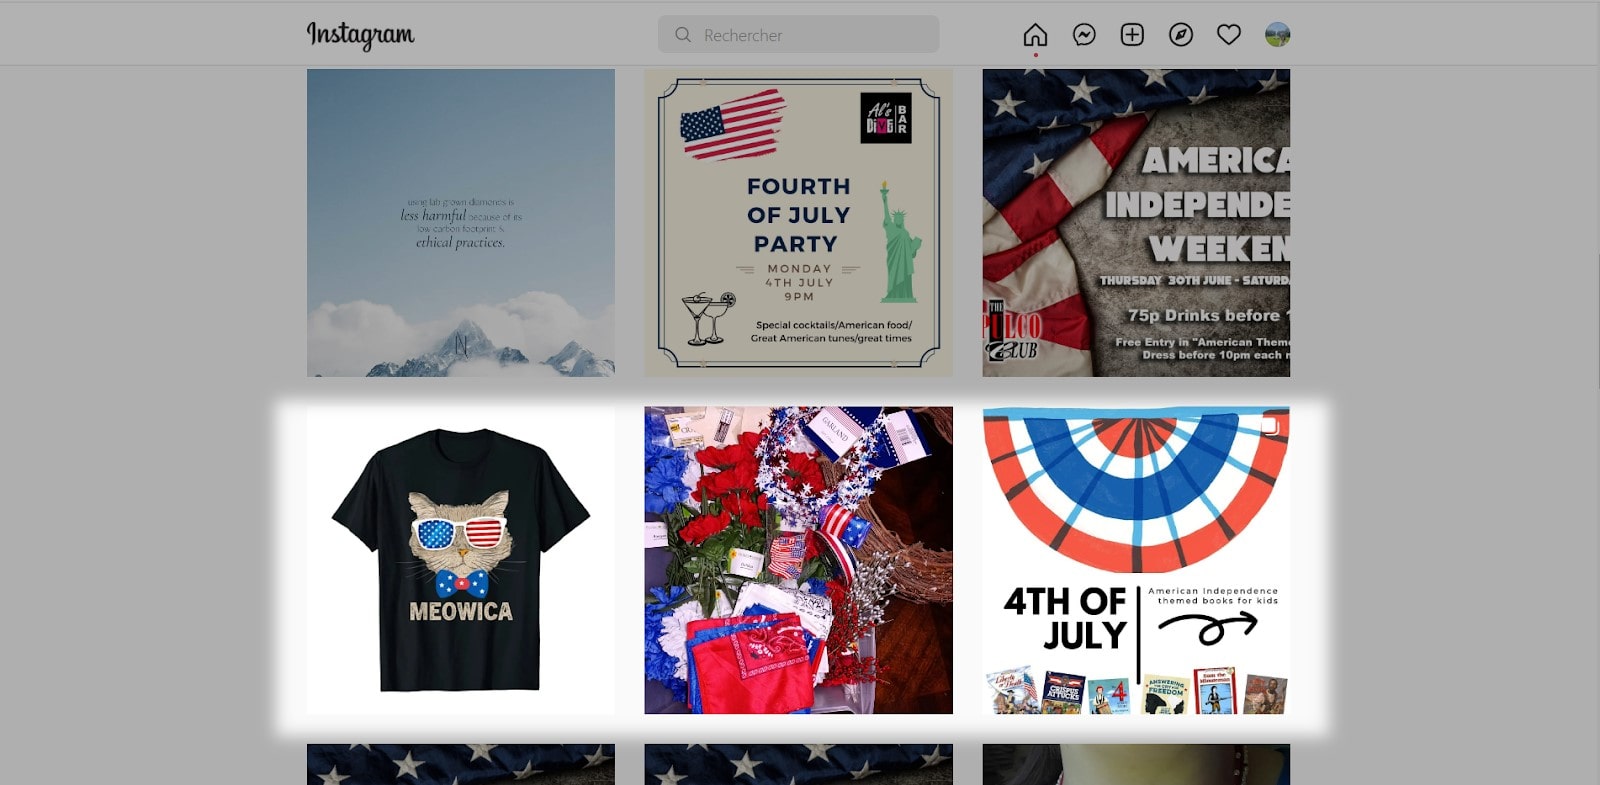 Use Instagram as a good way to attract your potential customers on the 4th of July 